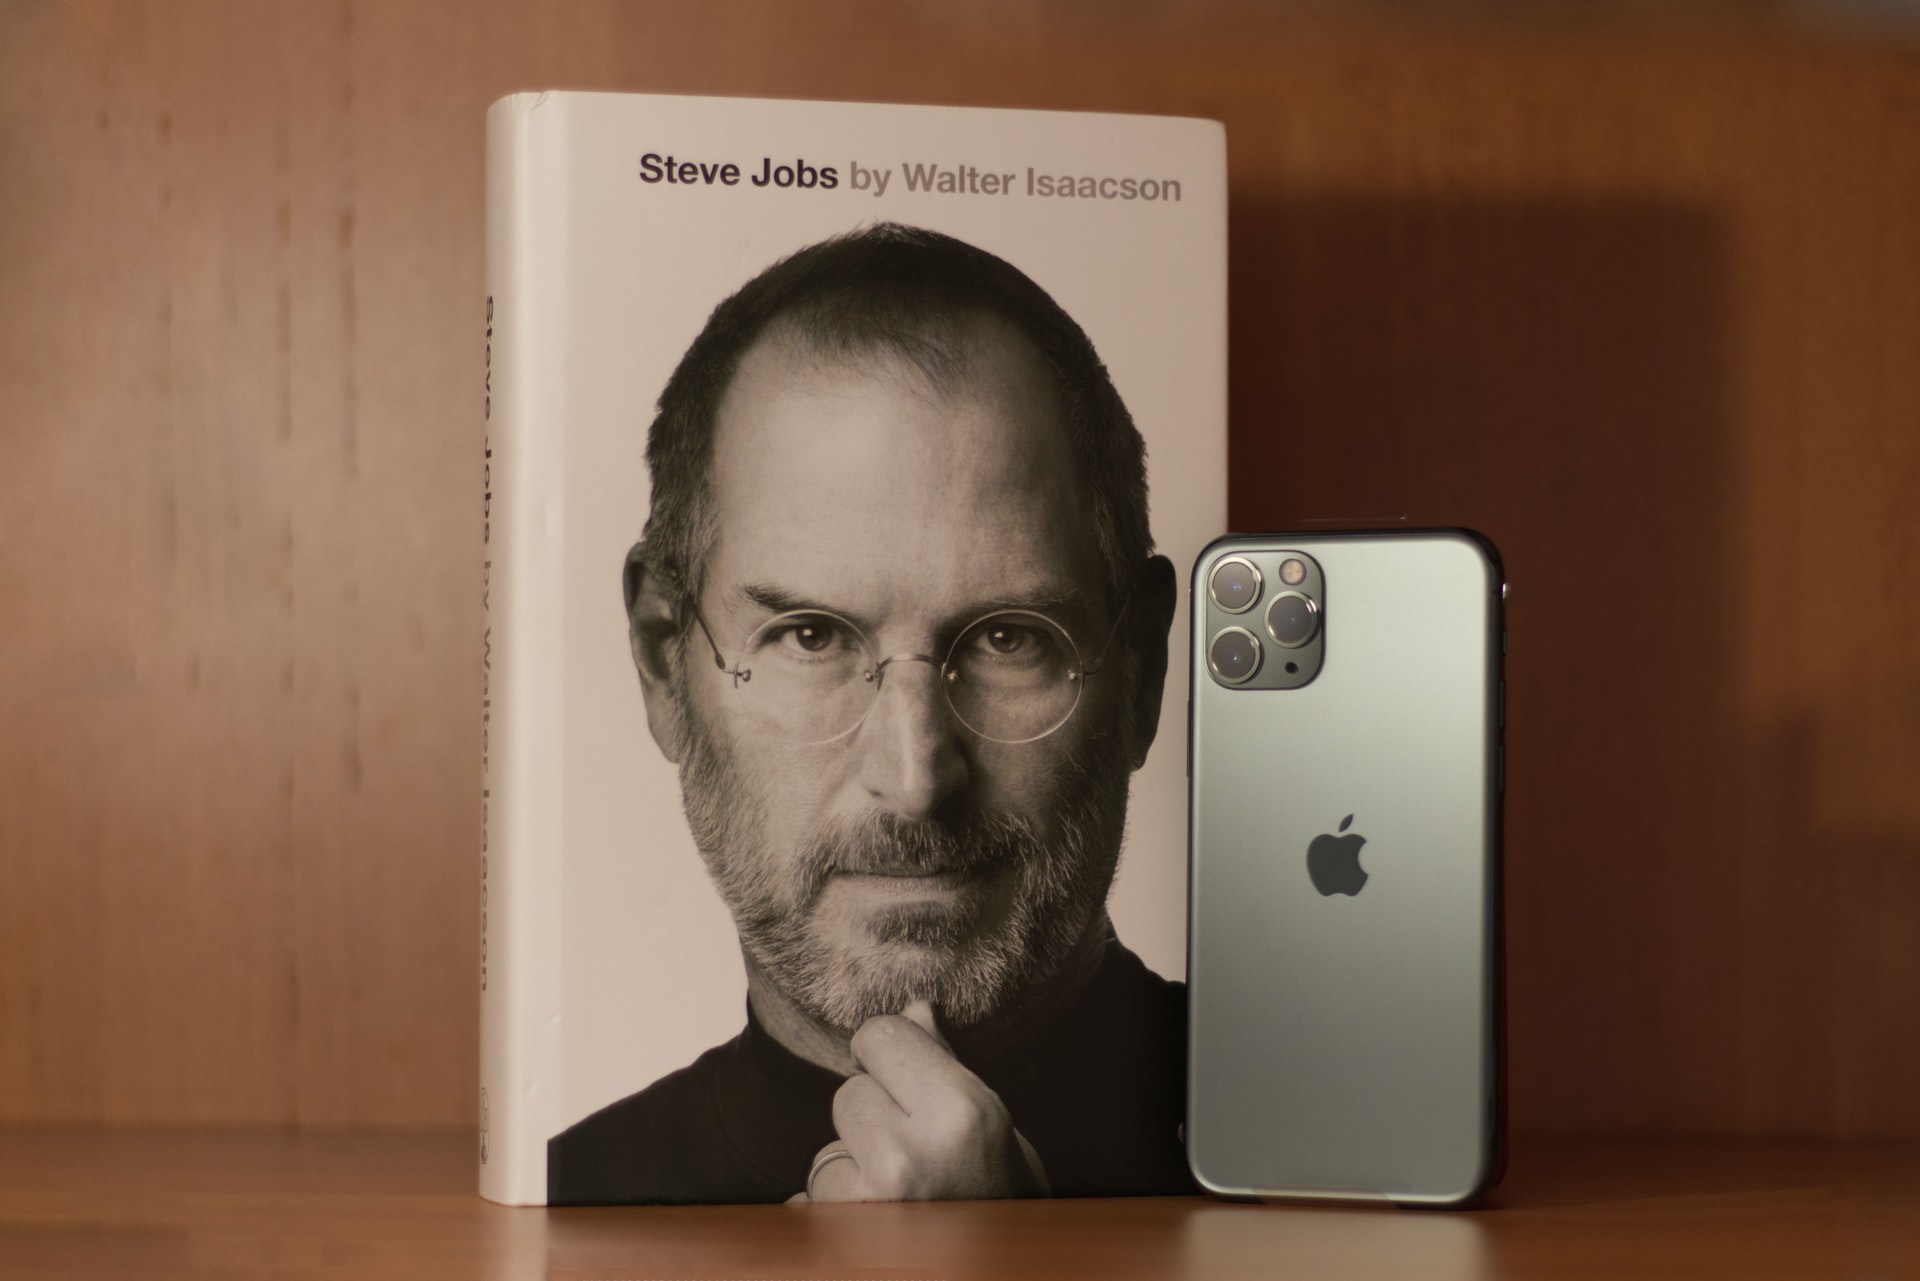 Steve jobs photo in a book cover and iPhone